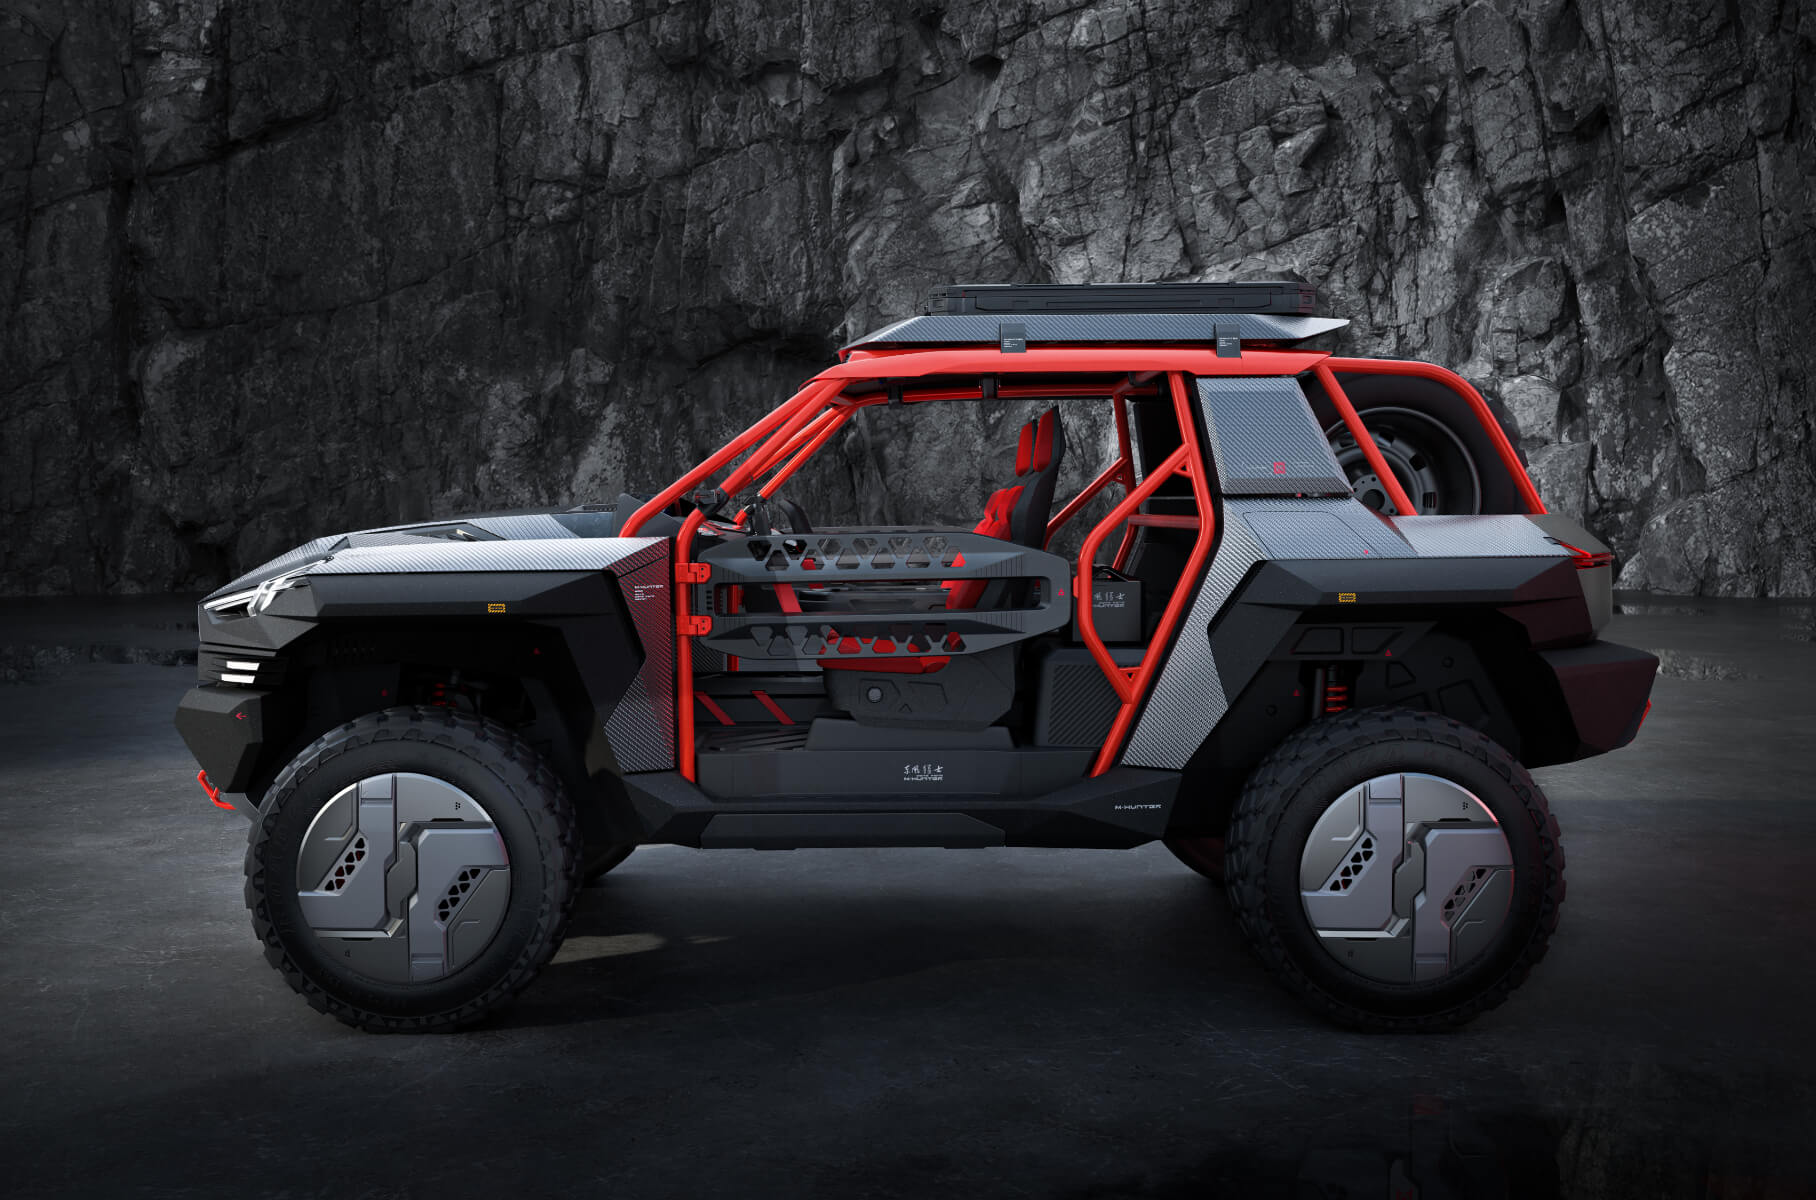 “Chinese Hummer” M-Hero, sold in Russia, received an extreme version